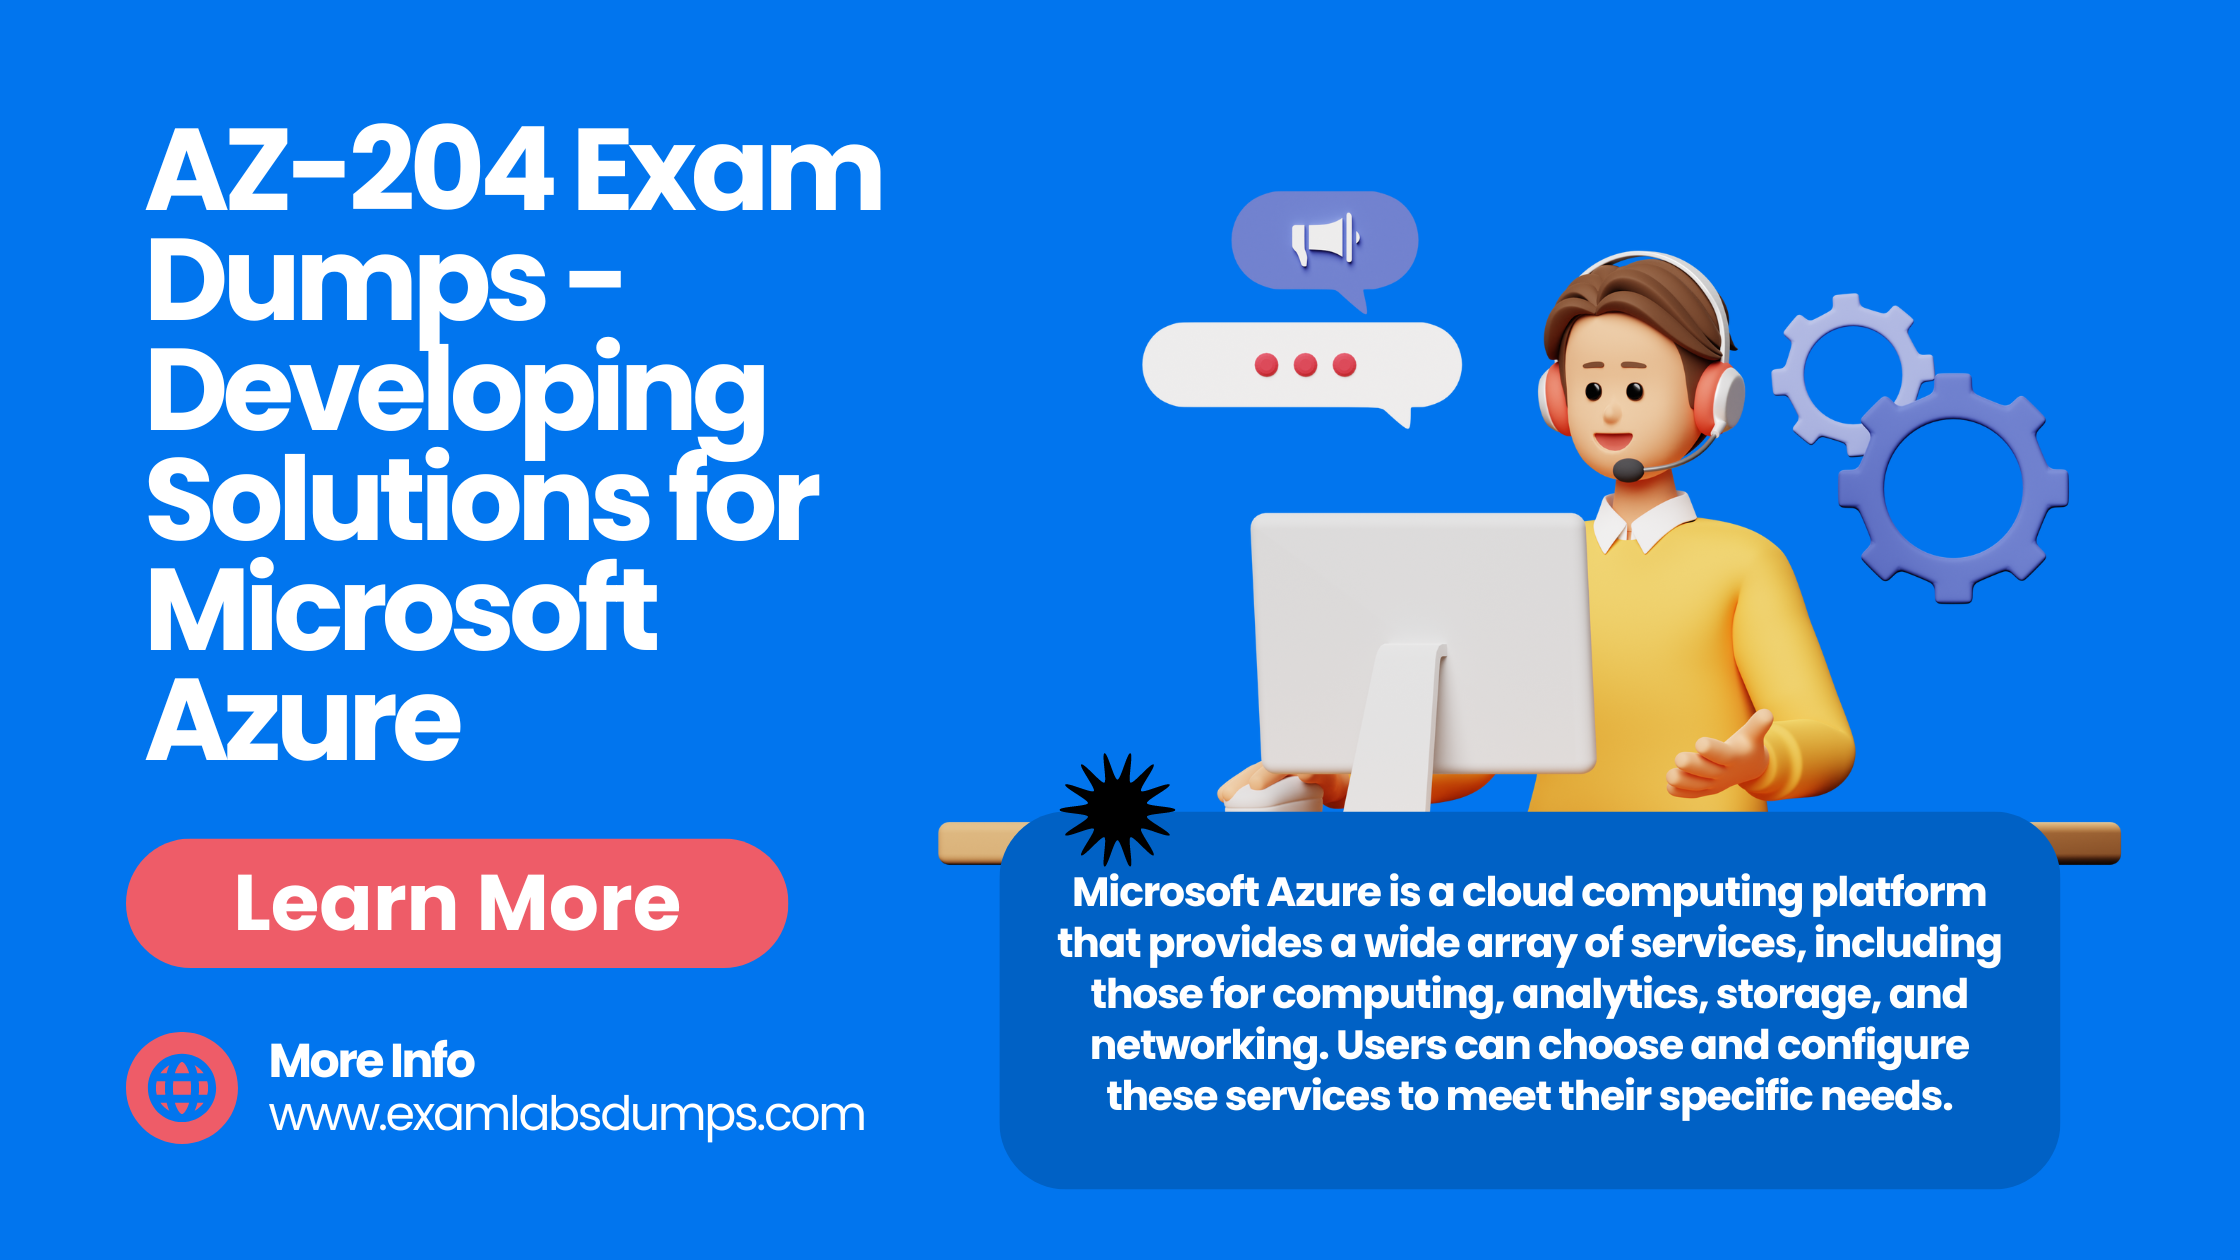 Exam Labs Dumps - Exam Questions And Certification Exam Dumps. Download The Free Demo. 100% Pass and Money Back Guarantee.